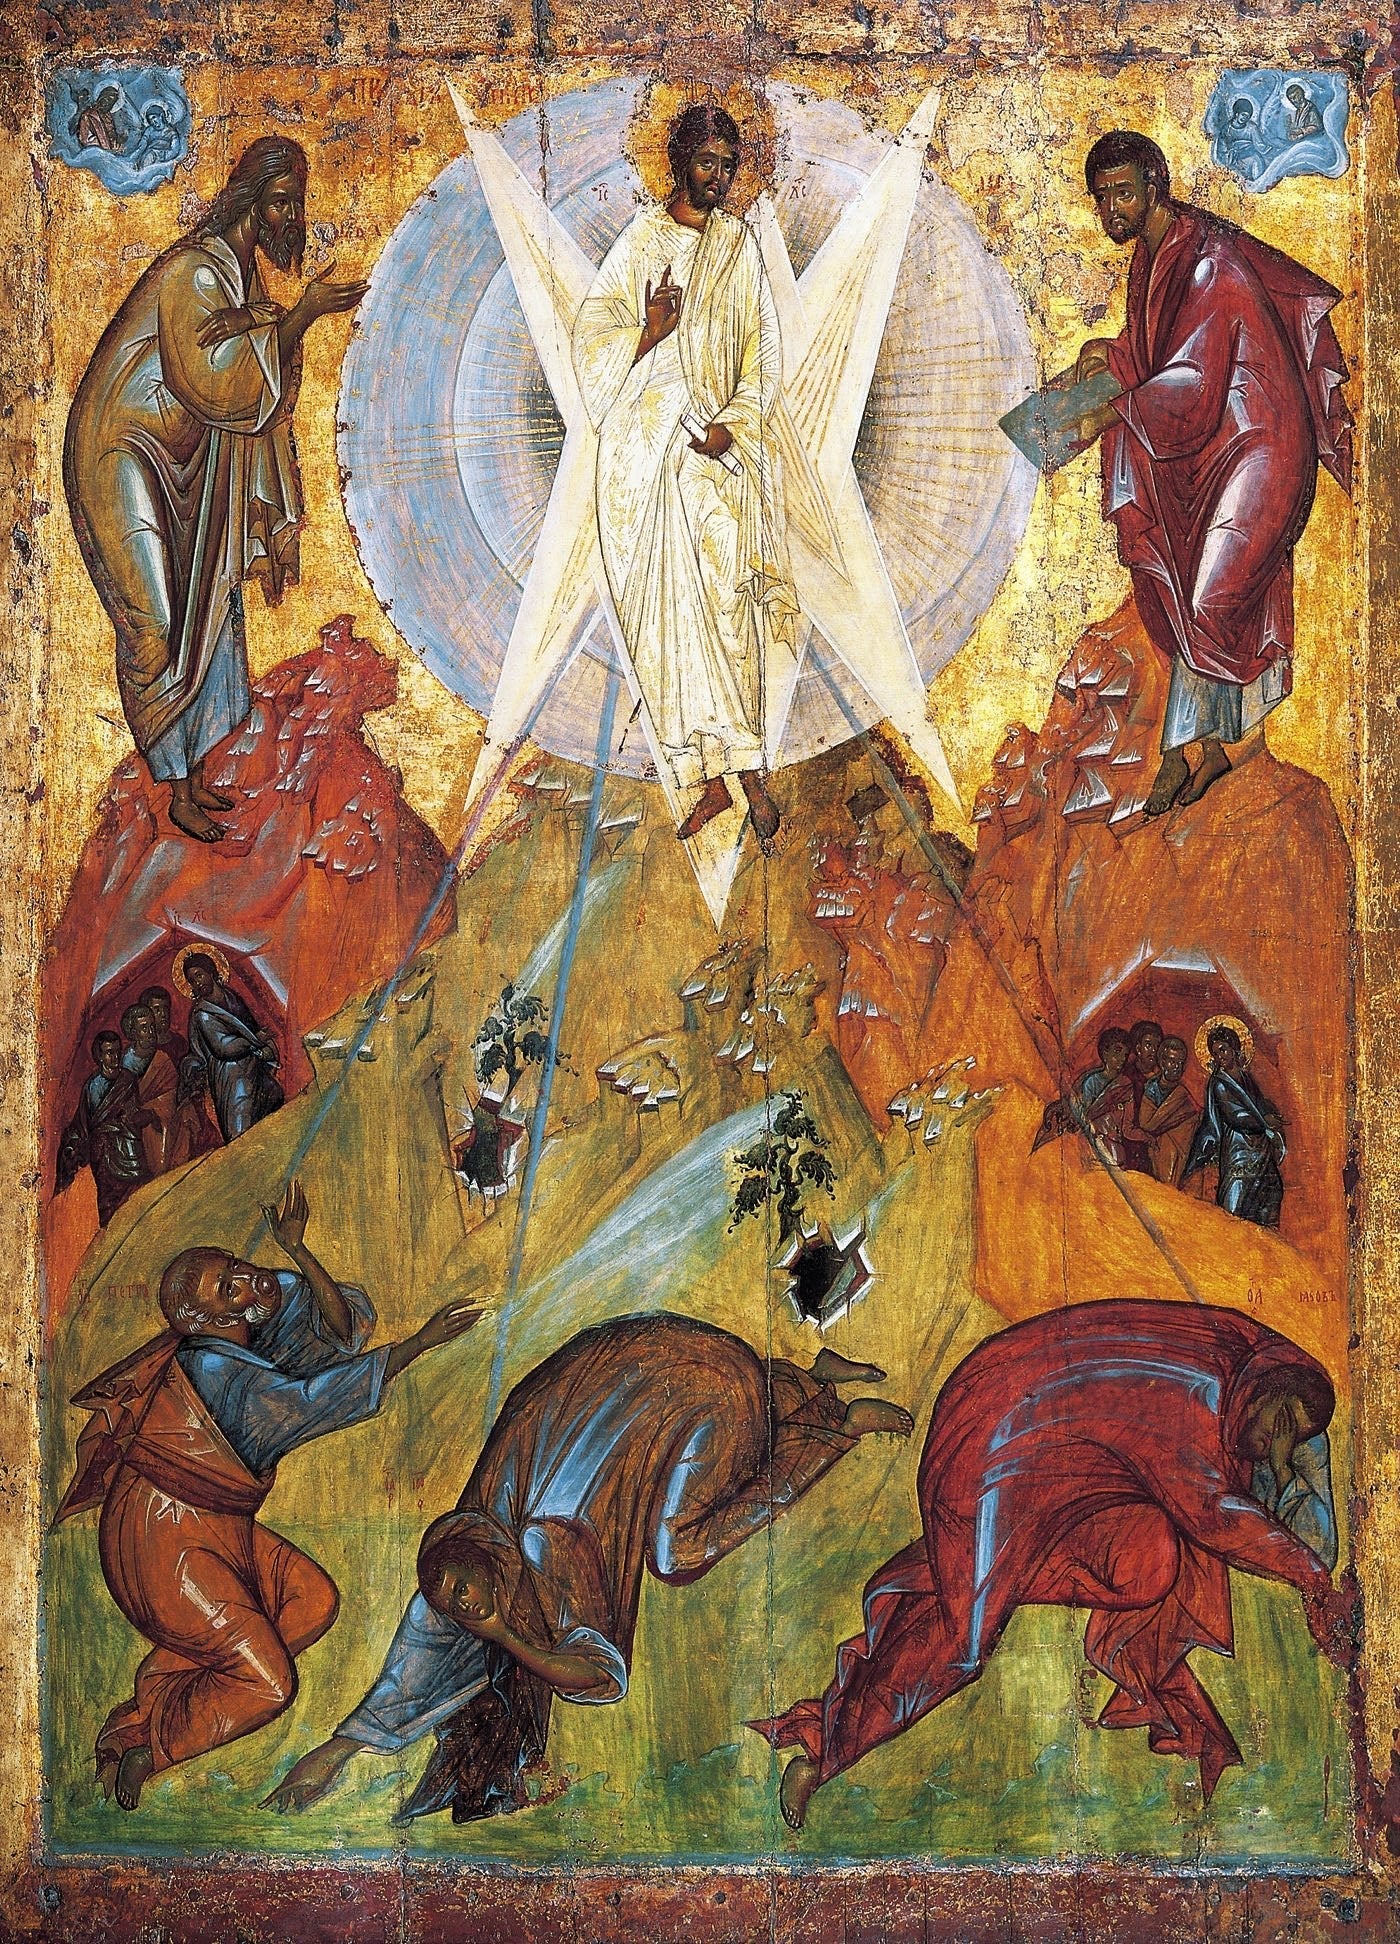 Beholding the Glory of God - A Sermon for Transfiguration (2020) - Holy Cross Monastery